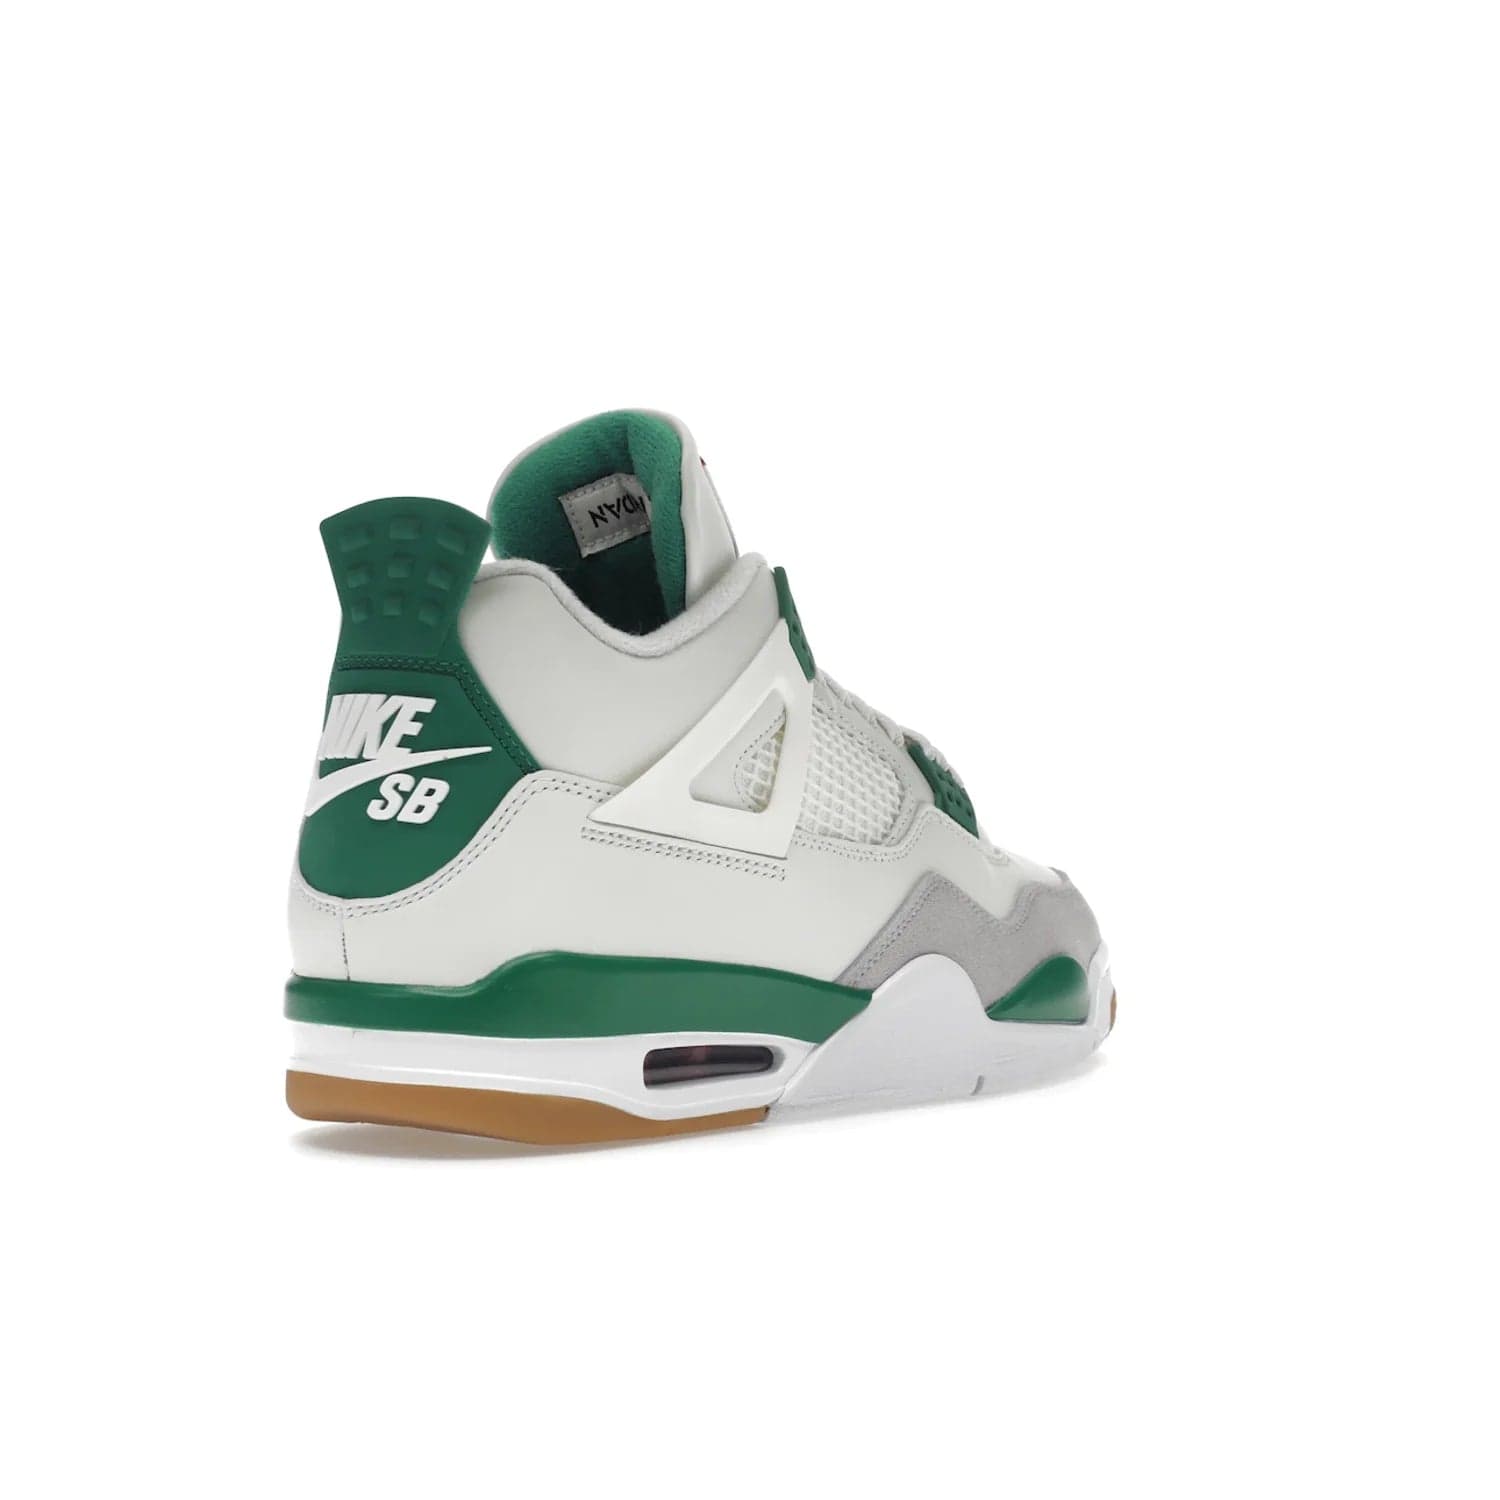 Jordan 4 Retro SB Pine Green - Image 32 - Only at www.BallersClubKickz.com - A white leather upper combined with a Neutral Grey suede mudguard gives this limited Air Jordan 4 Retro SB Pine Green sneaker its unmistakable style. Released March 20, 2023, the Jordan 4 Retro SB features a white and Pine Green midsole plus a red air unit with a gum outsole for grip. The perfect blend of Nike SB skateboarding and Jordan 4 classic design.